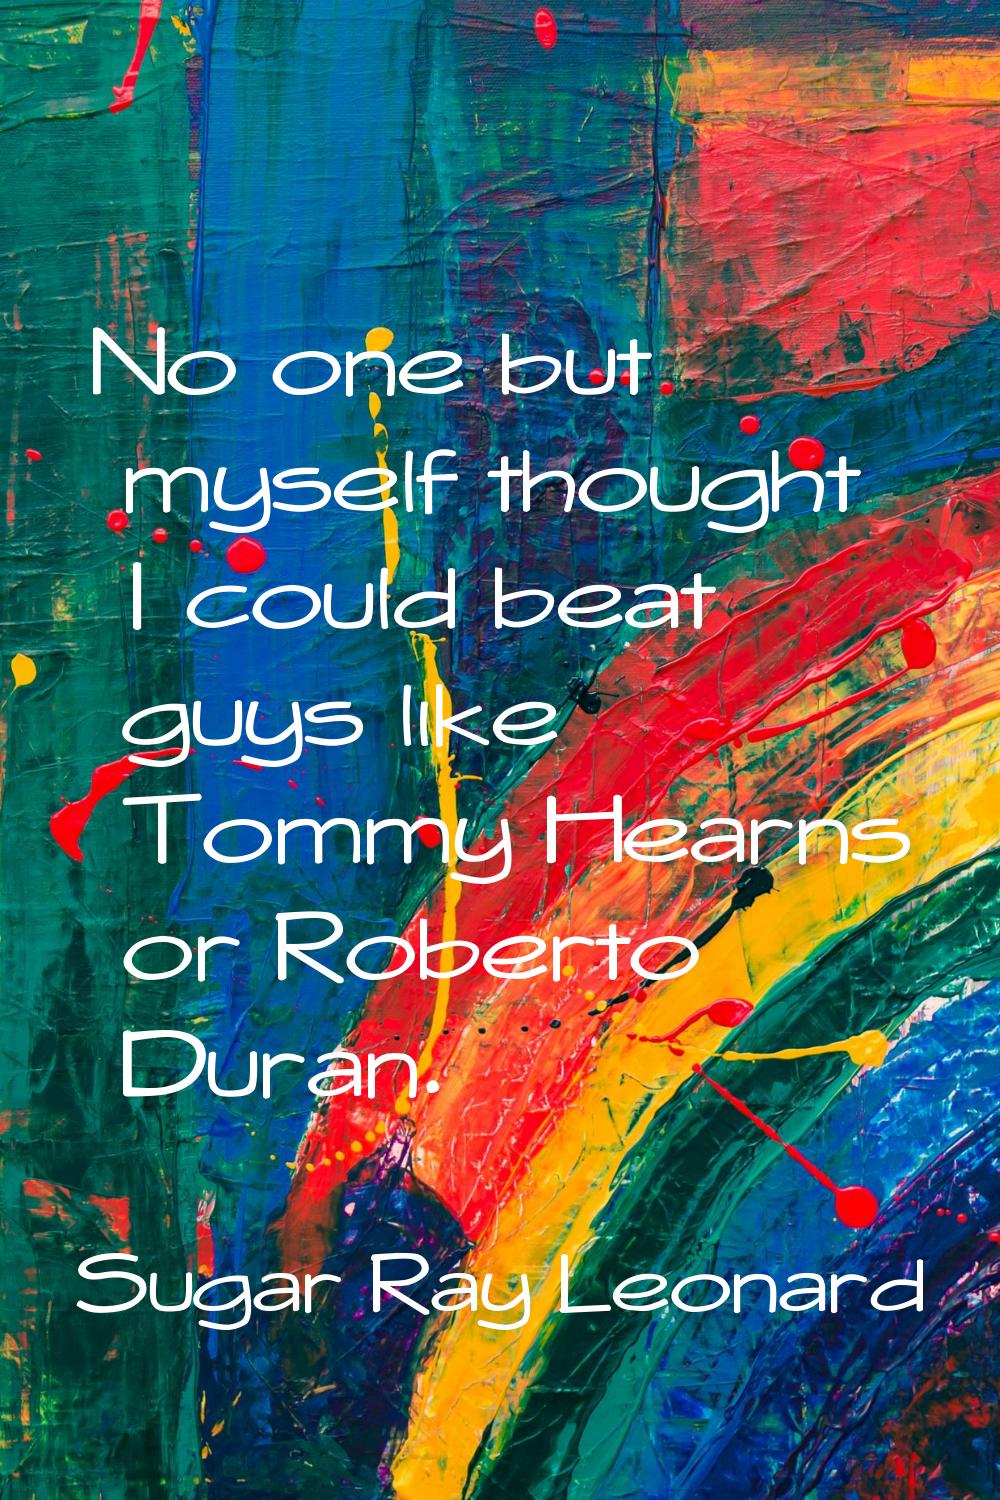 No one but myself thought I could beat guys like Tommy Hearns or Roberto Duran.